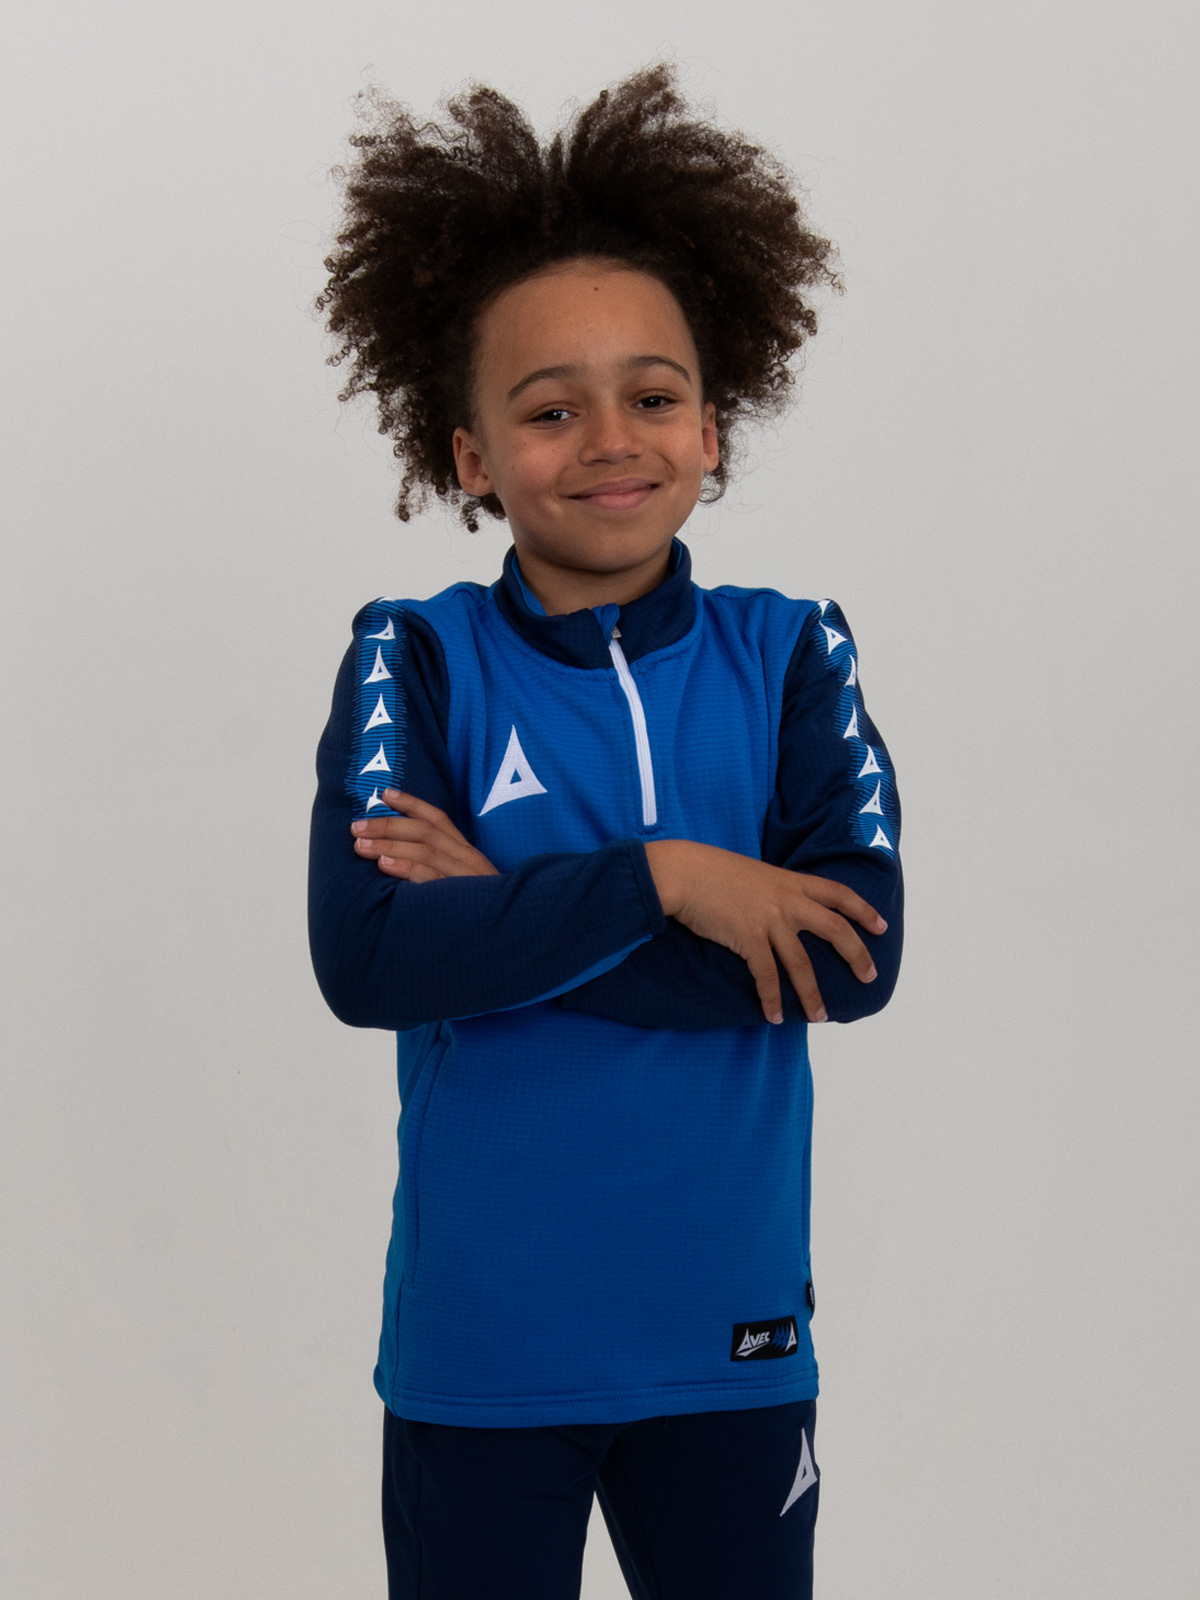 with his arms folded, this young boy is wearing a soft and comfortable royal blue and navy jumper with a zip.